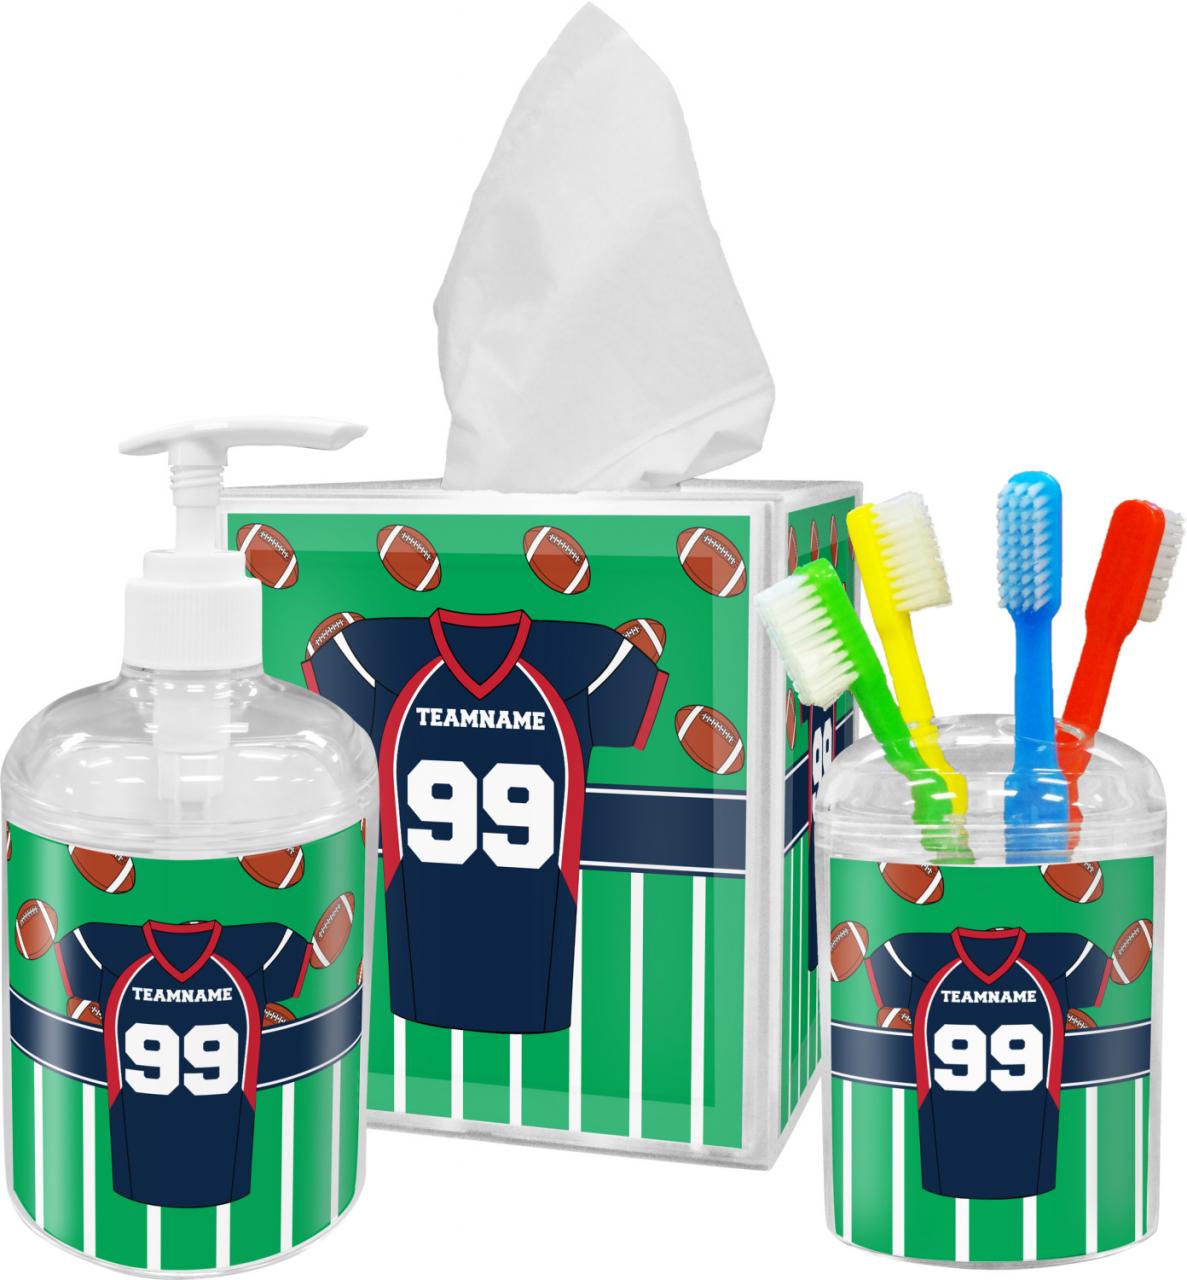 Football Jersey Acrylic Bathroom Accessories Set w/ Name and Number